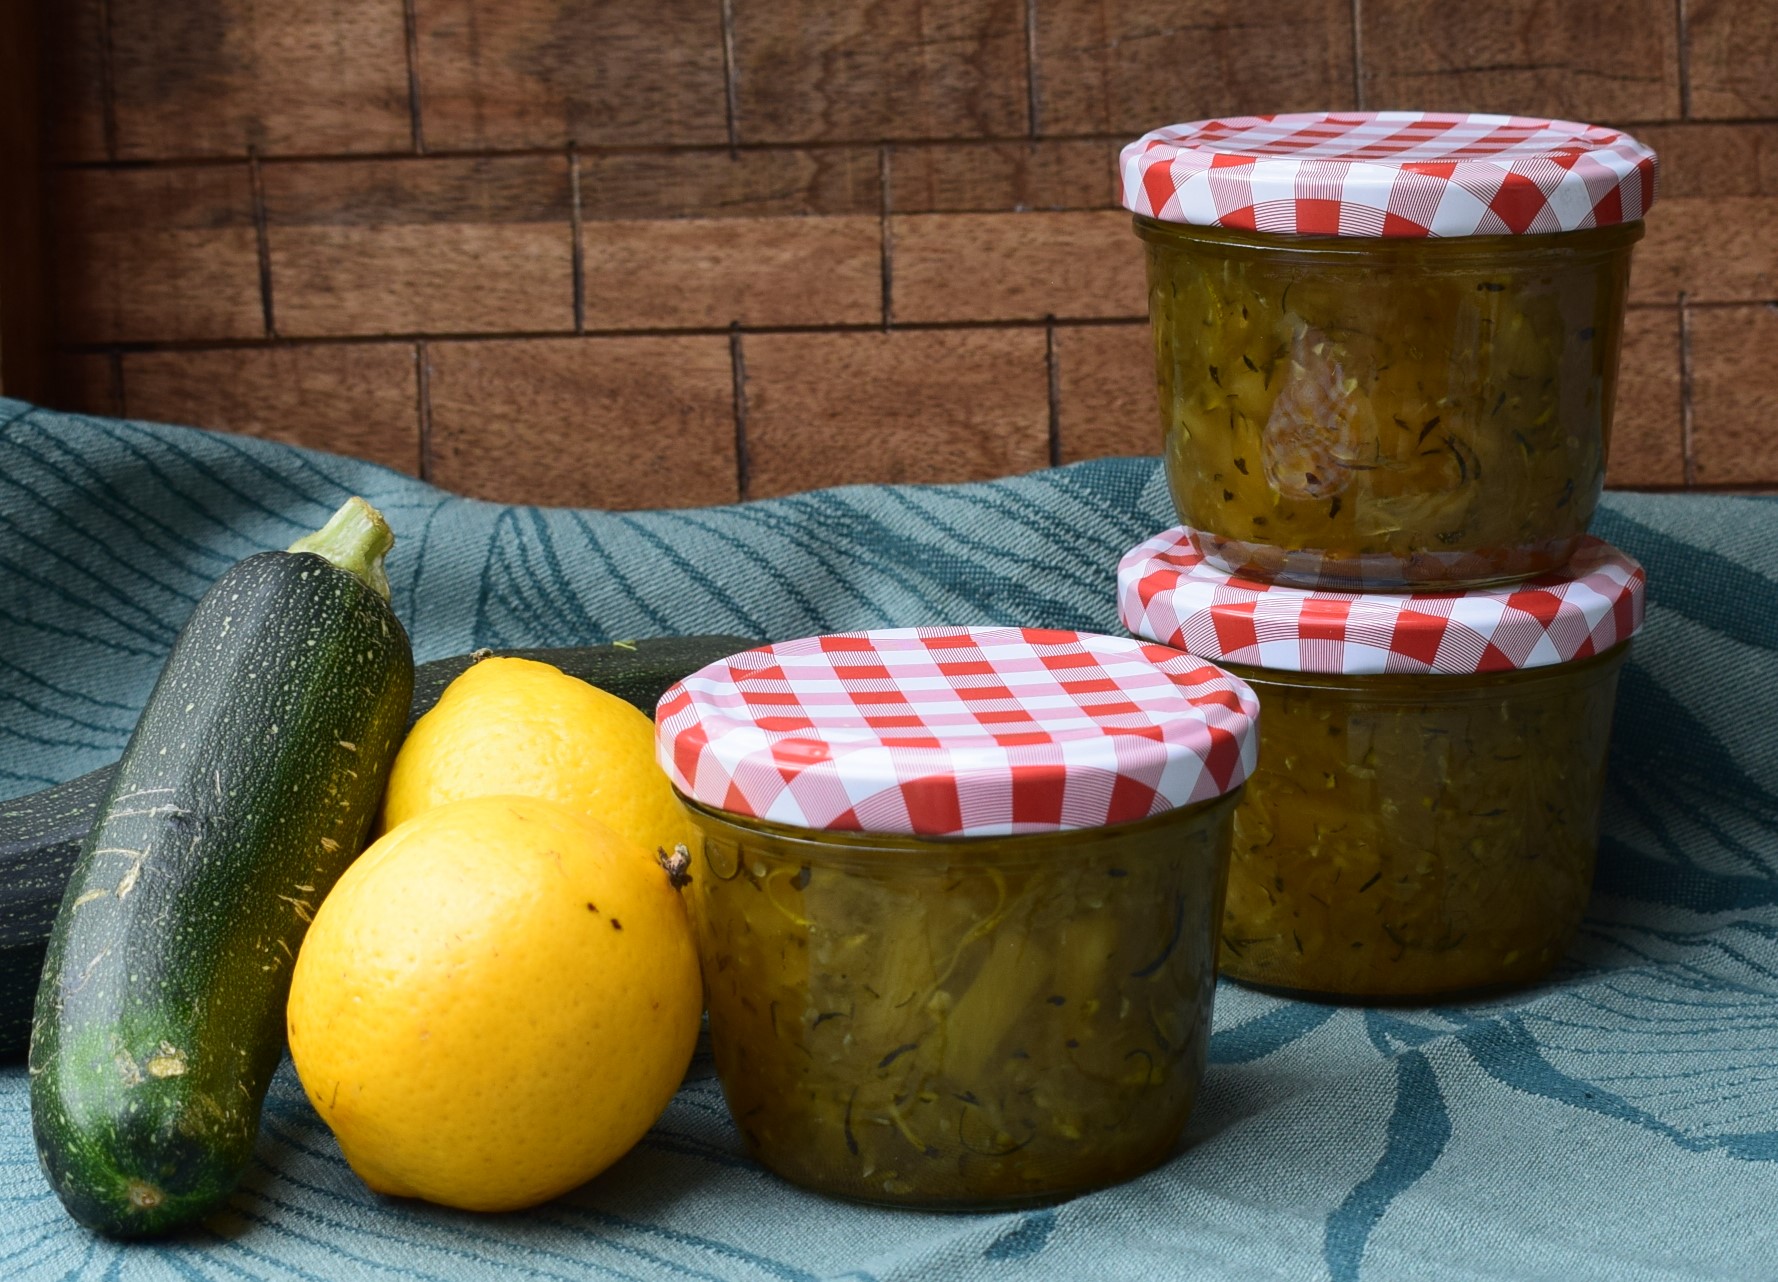 Zucchini-Ananas Marmelade - Soni - Cooking with love